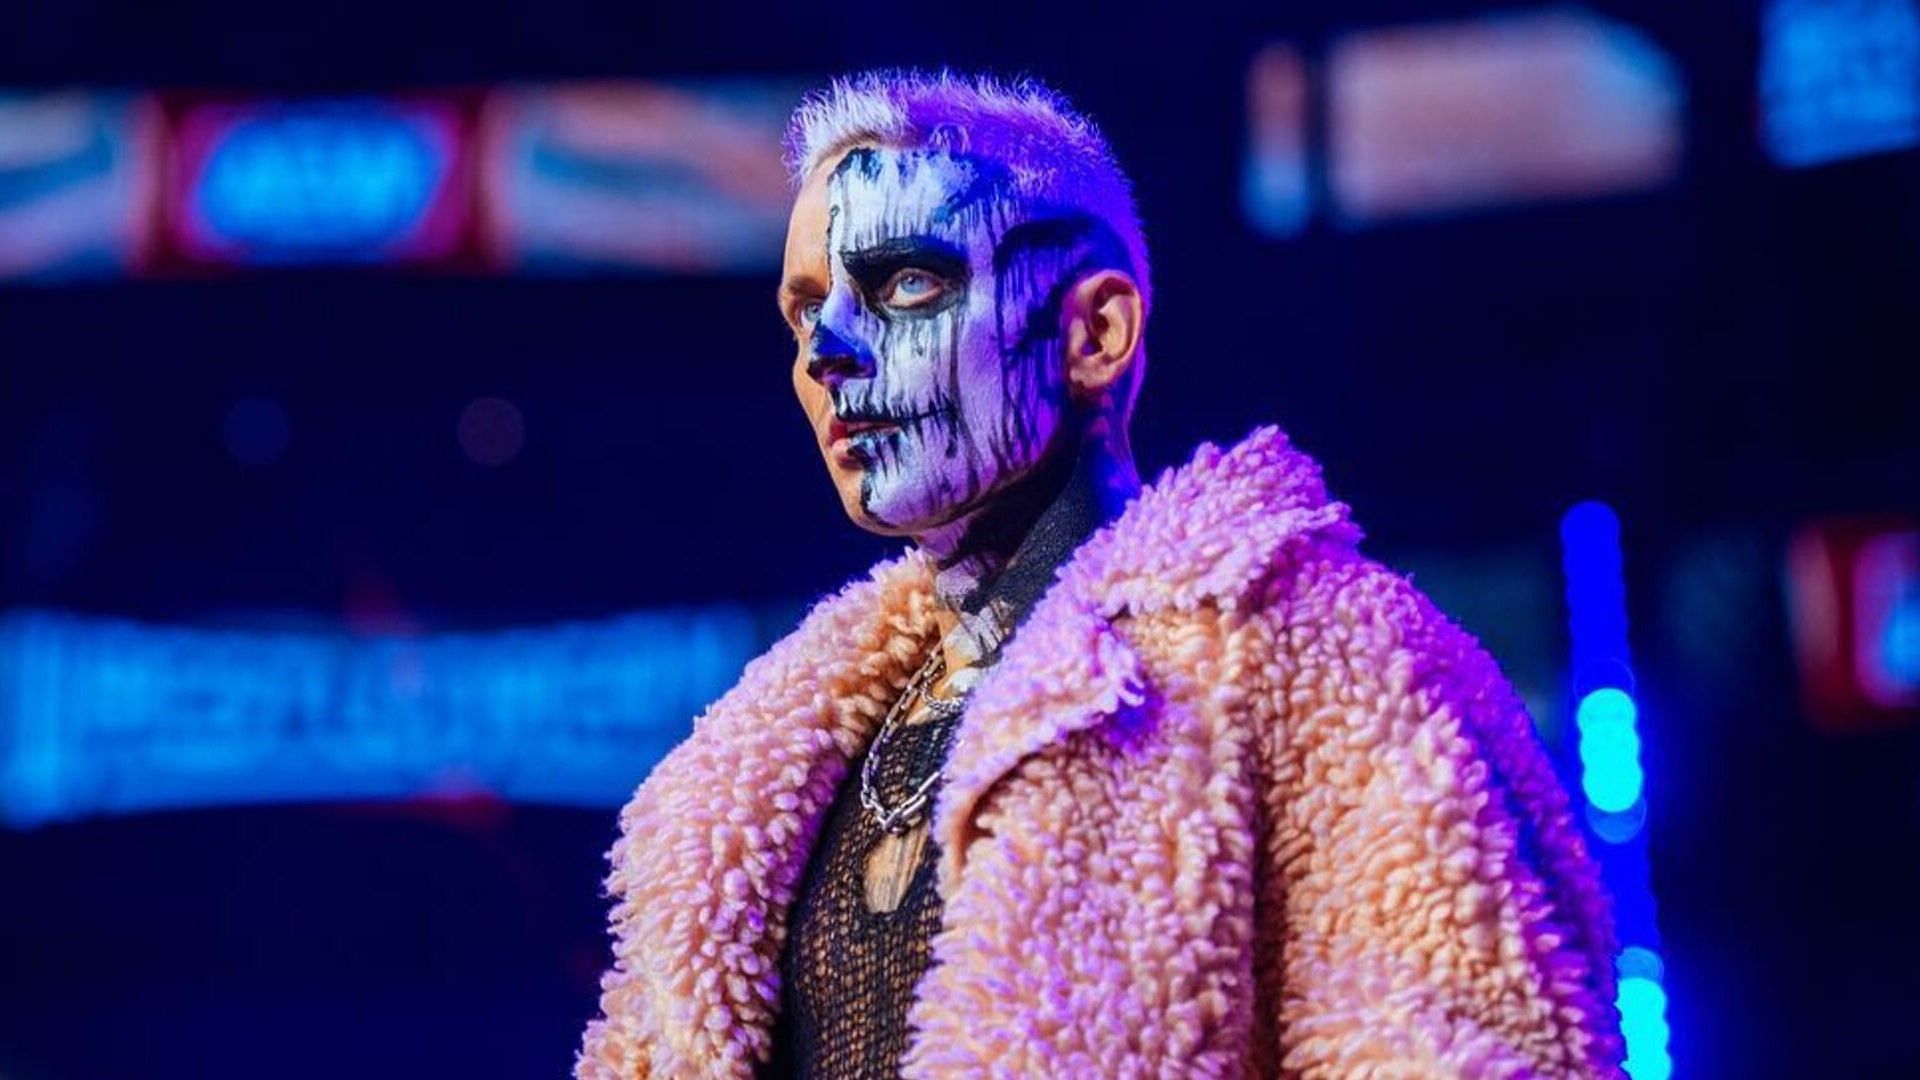 Darby Allin makes his entrance at AEW WrestleDream